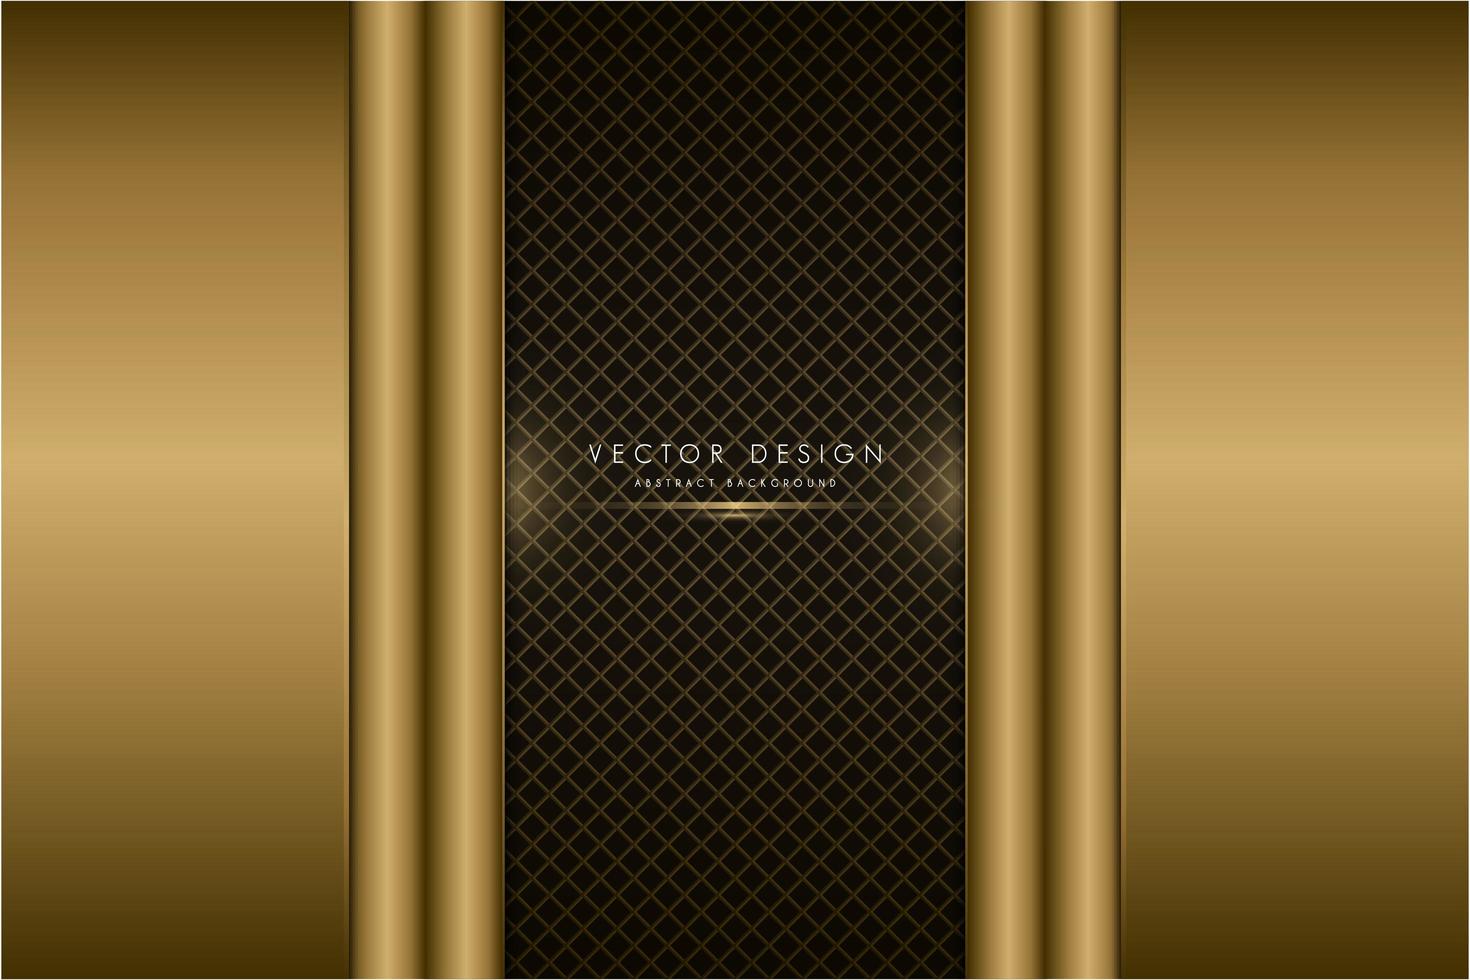 Modern black and gold metallic background vector